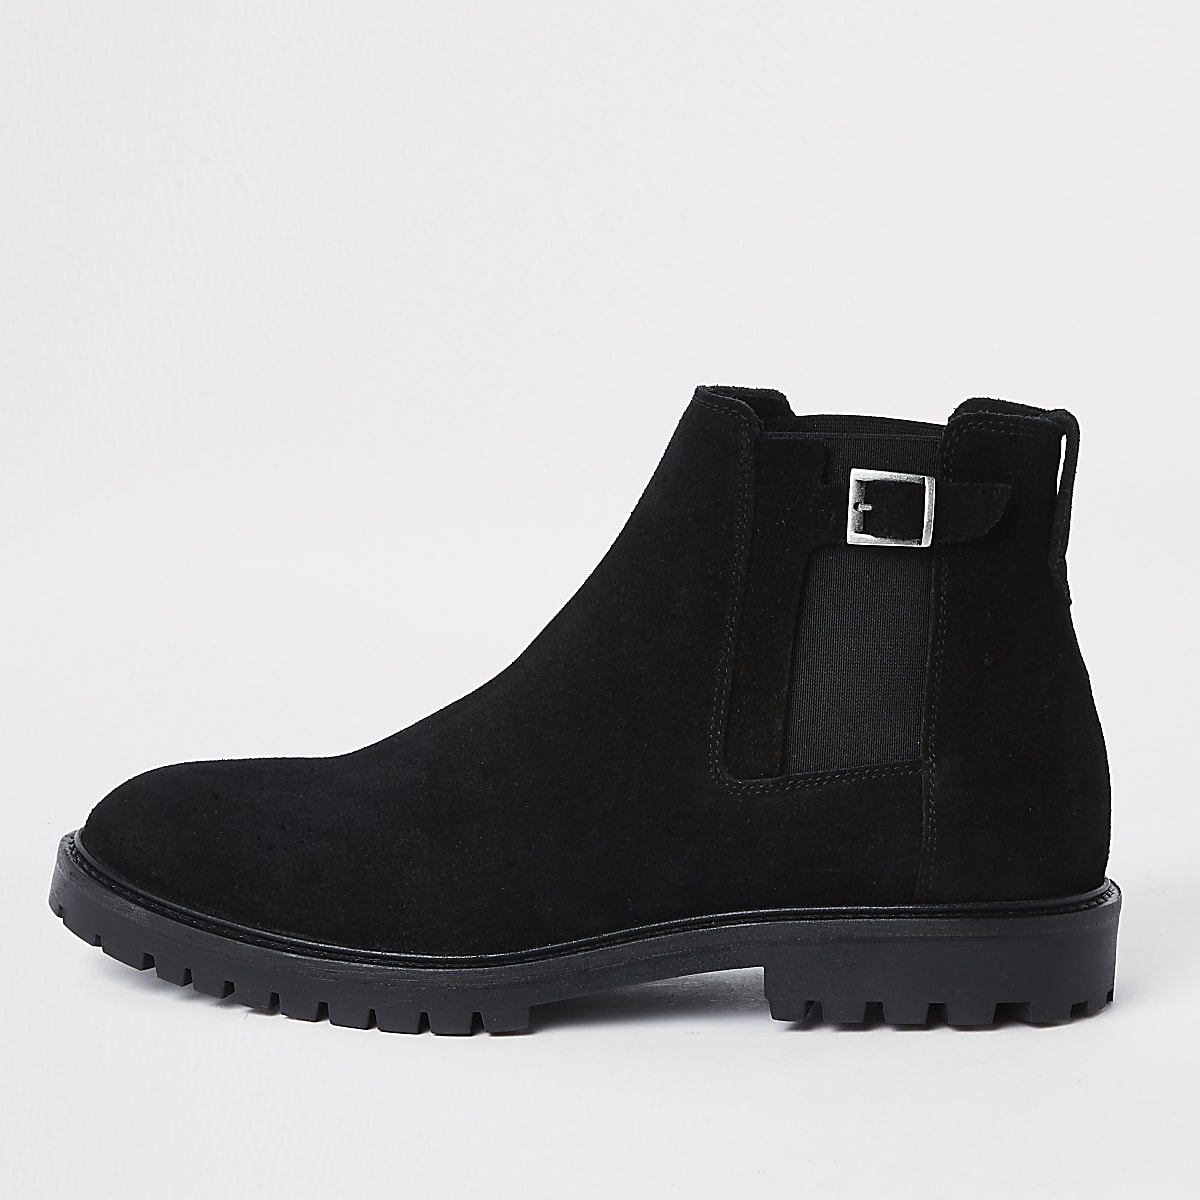 Black suede sprayed toe chelsea boots - Boots - Shoes & Boots - men